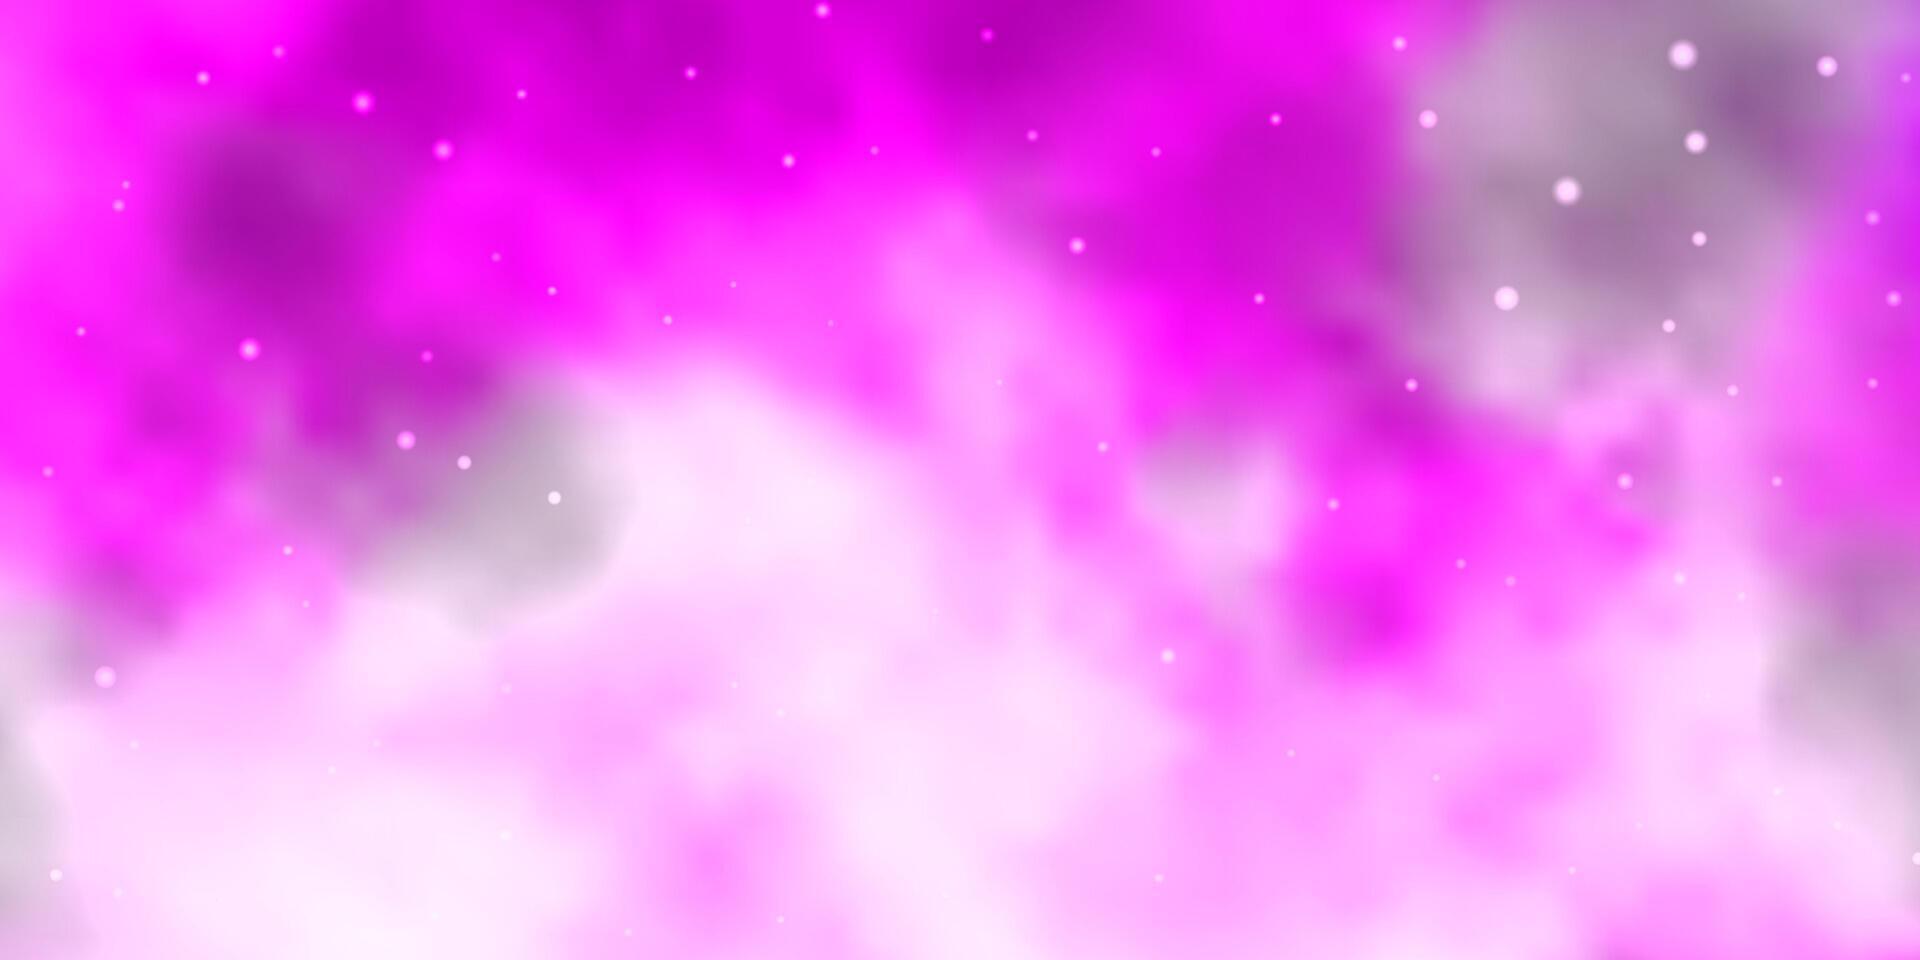 Light Purple vector background with colorful stars.